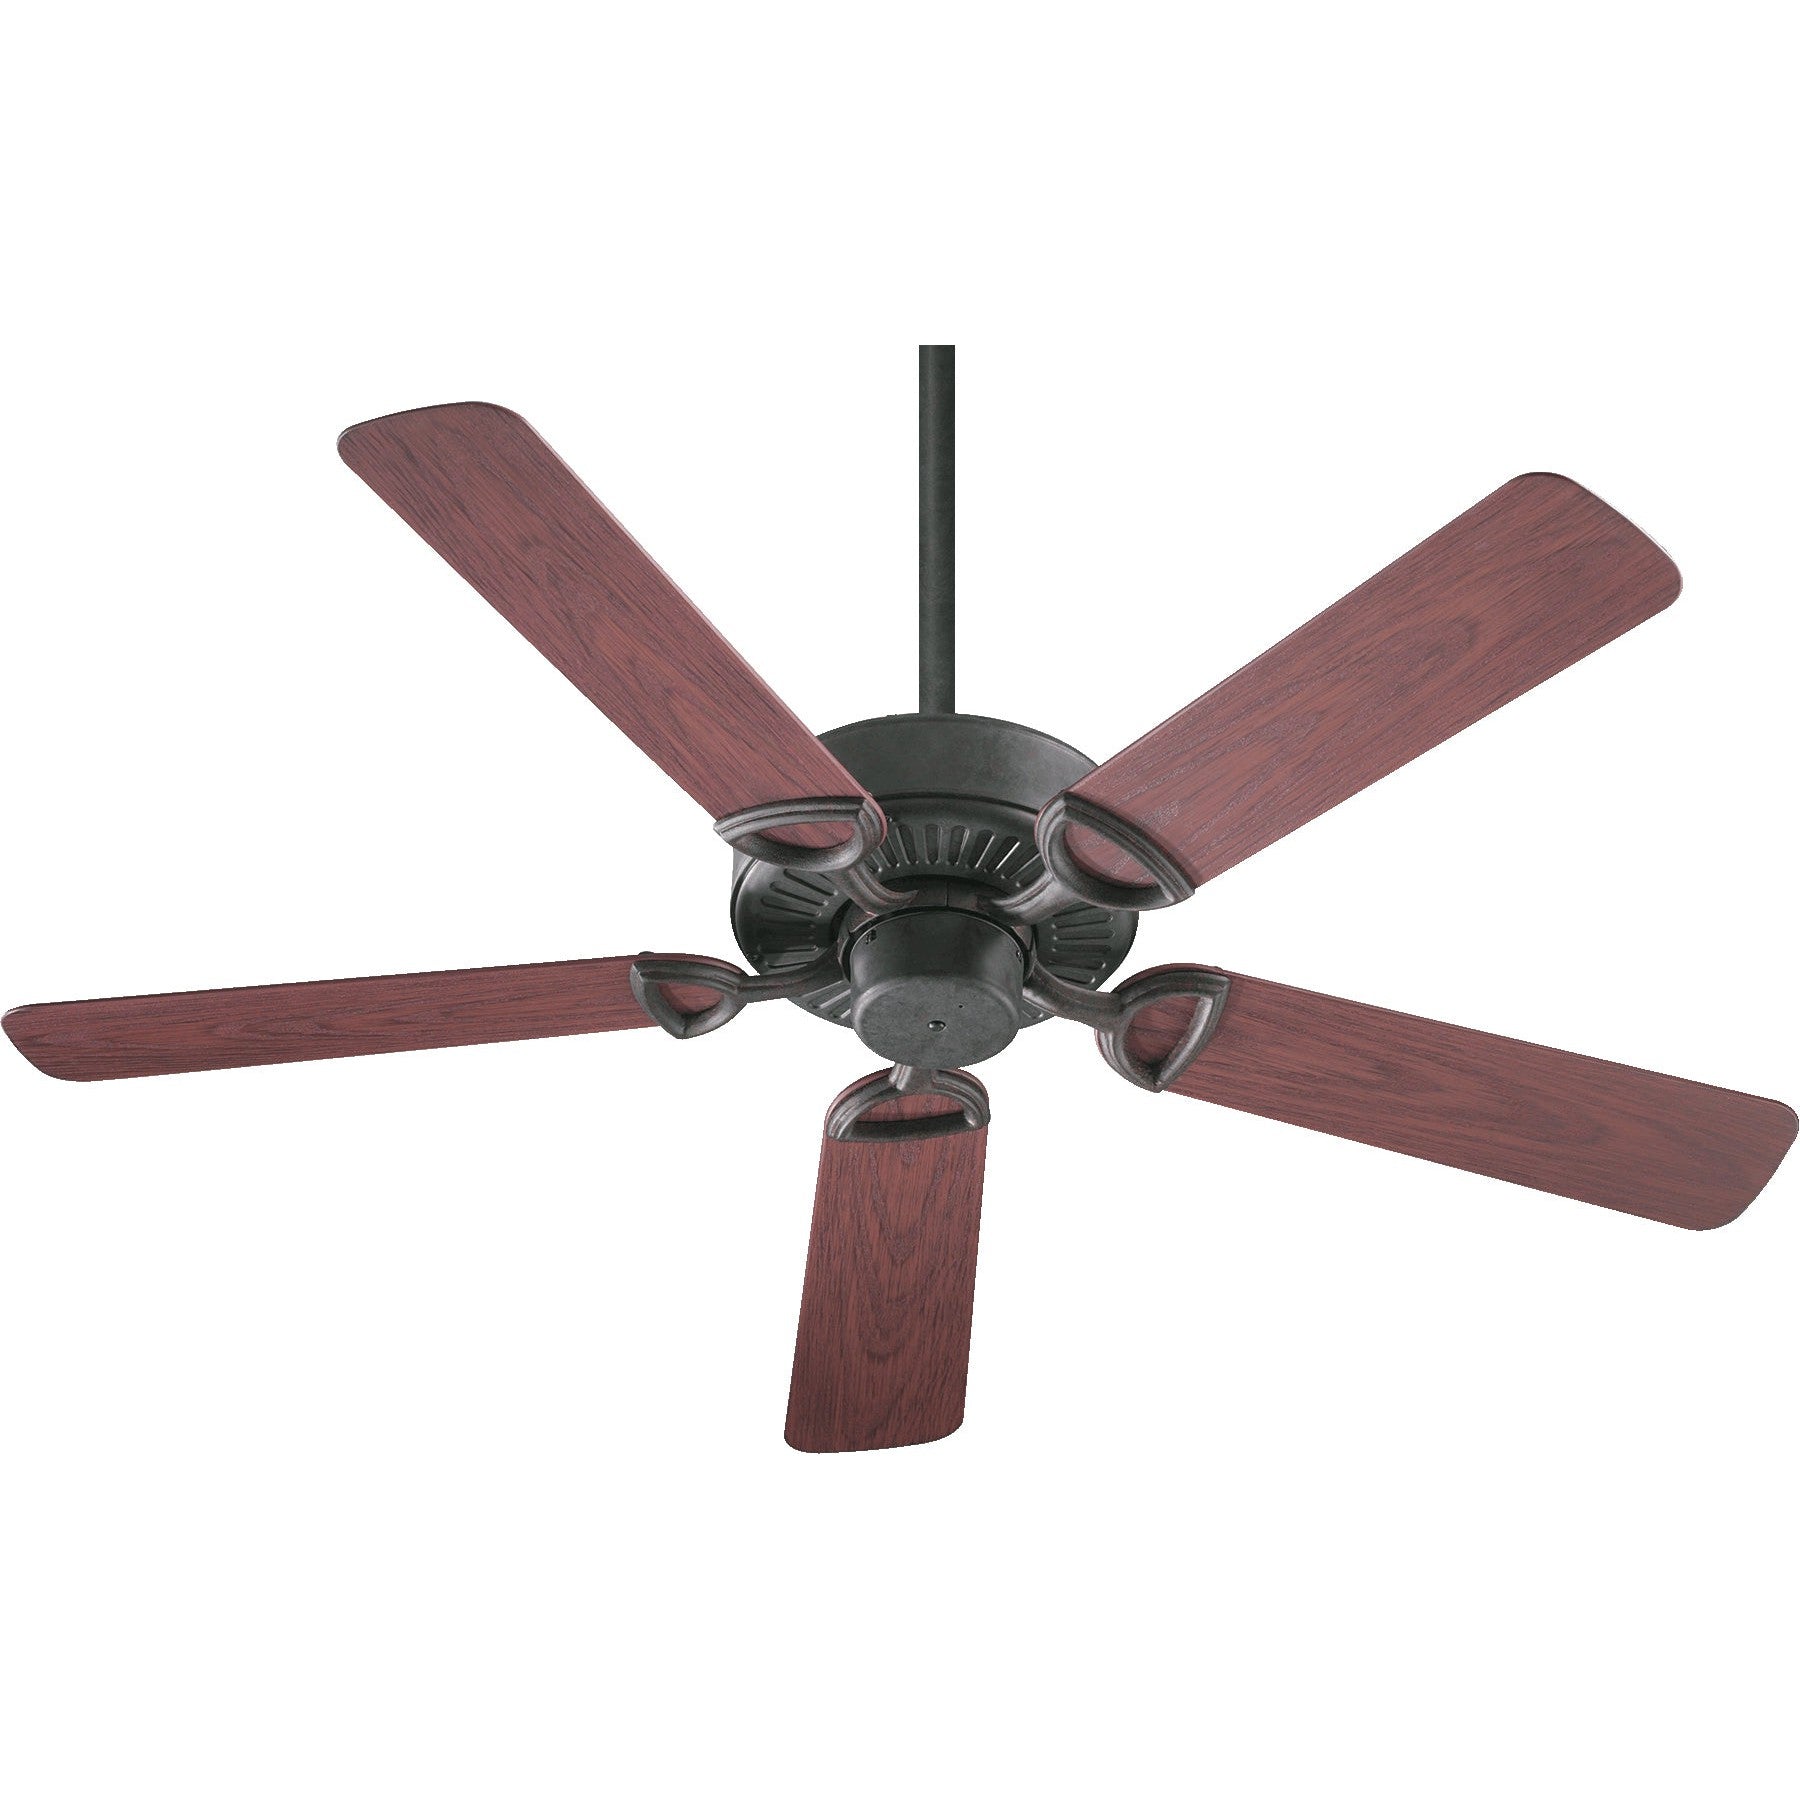 Quorum Estate Patio 143525-44 Ceiling Fan - Toasted Sienna, Rosewood